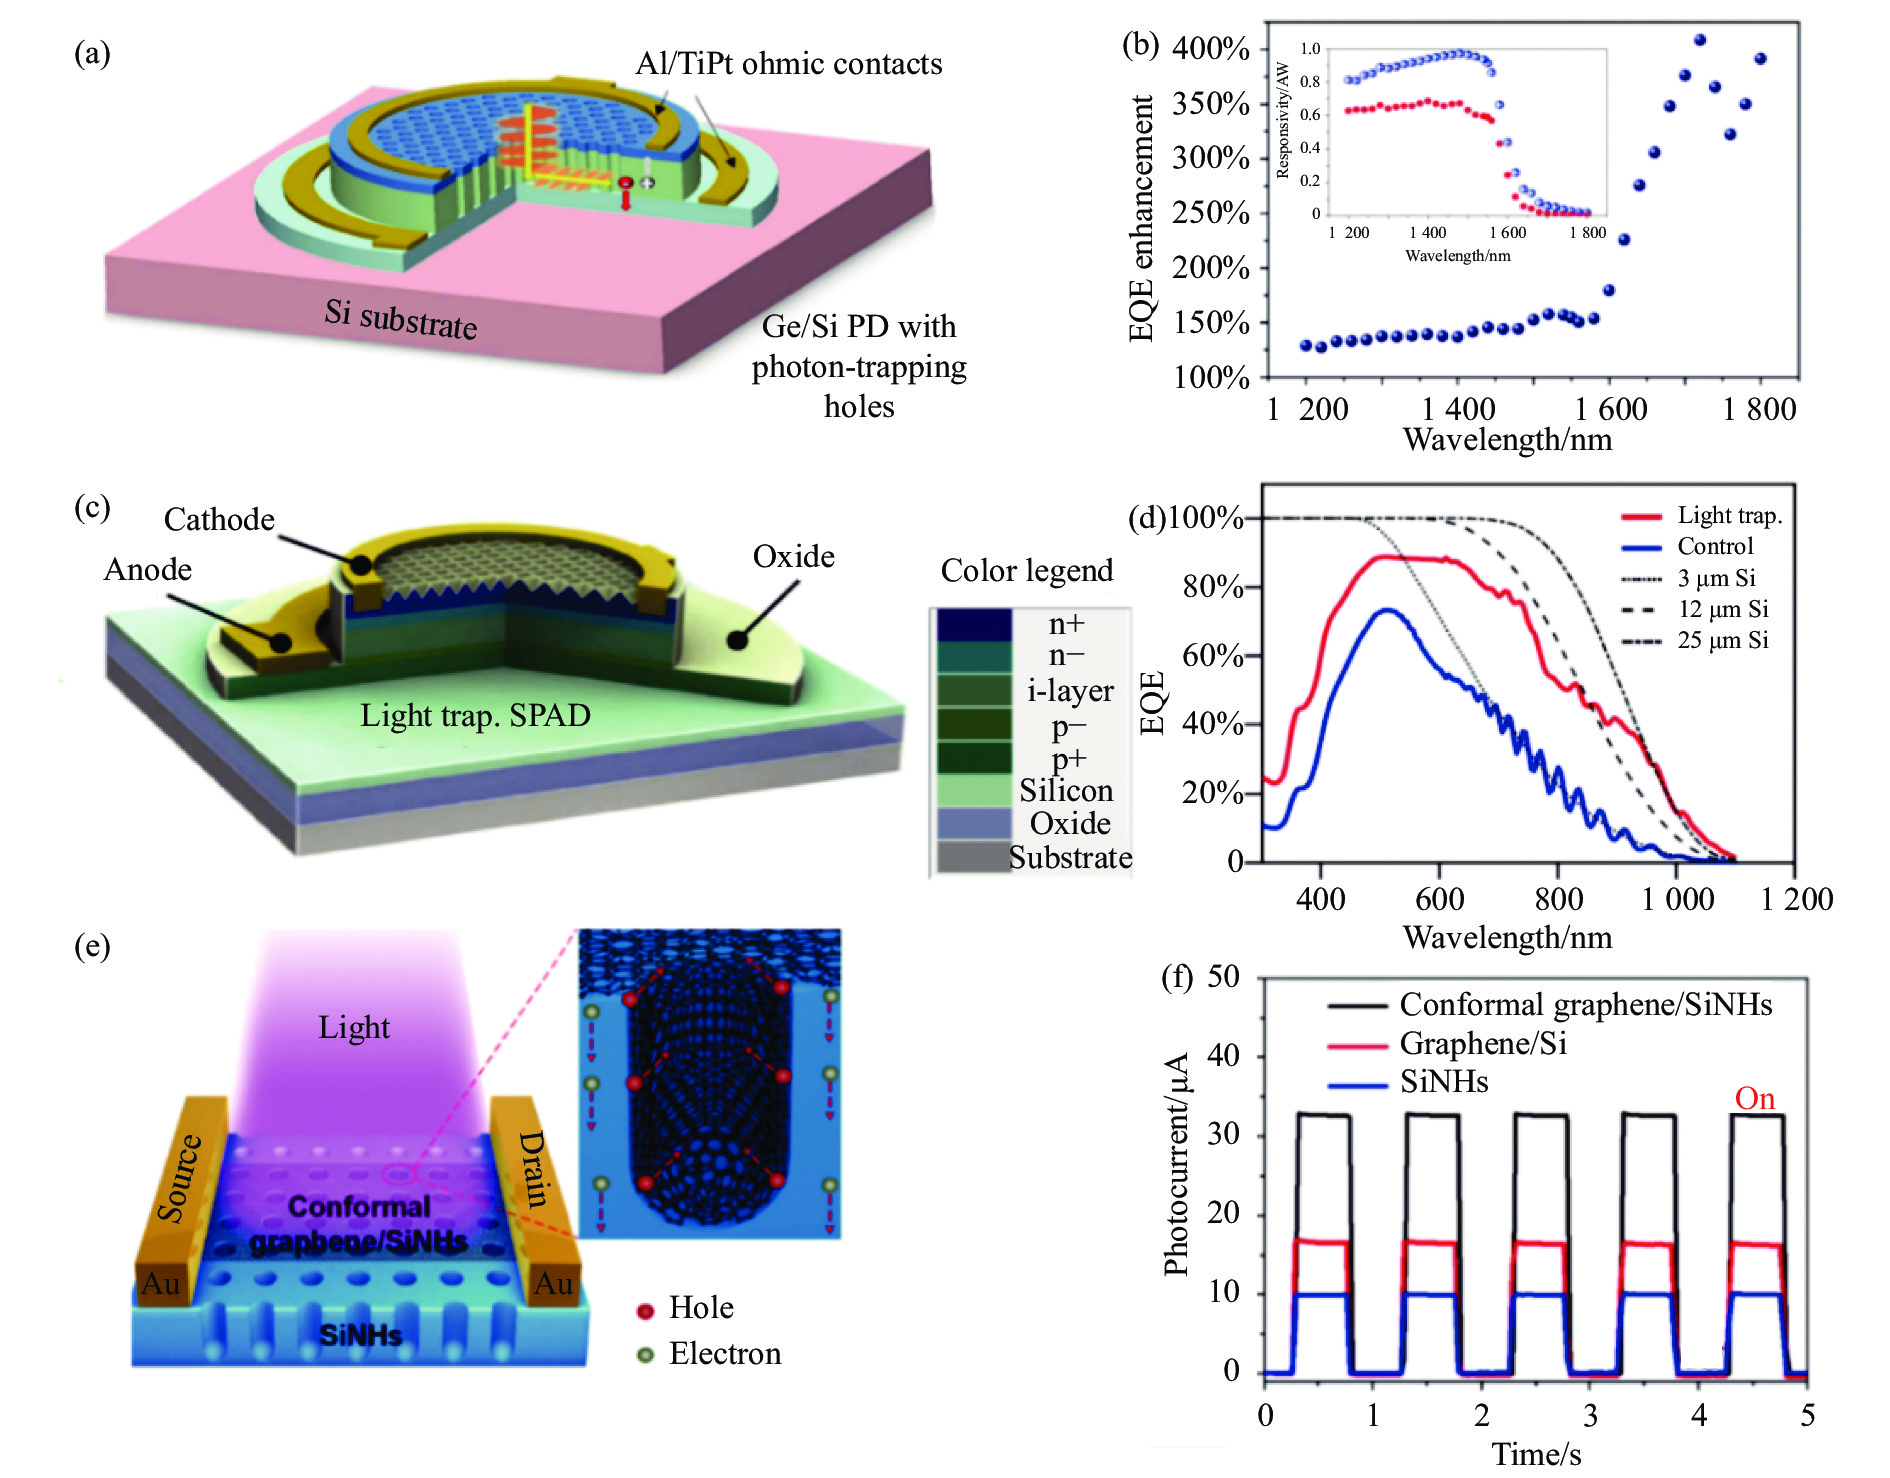 Infrared detectors with micro-holes on silicon substrates[19-21]; （a） Schematic diagram of Si-Ge optoelectronic device with micro-hole array structures[19]; （b） External quantum efficiency enhancement coefficient and responsivity in the 1 200-1 800 nm band of the Si-Ge device[19]；（c） Schematic diagram of a silicon single-photon avalanche detector with micro-hole array structures[20]; （d） External quantum efficiency of devices of different sizes[20]; （e） Schematic diagram of conformal graphene/silicon nanopore detector[21] ; （f） Photoelectric response of silicon nanopore, graphene/silicon and conformal graphene/silicon nanopore detectors[21]